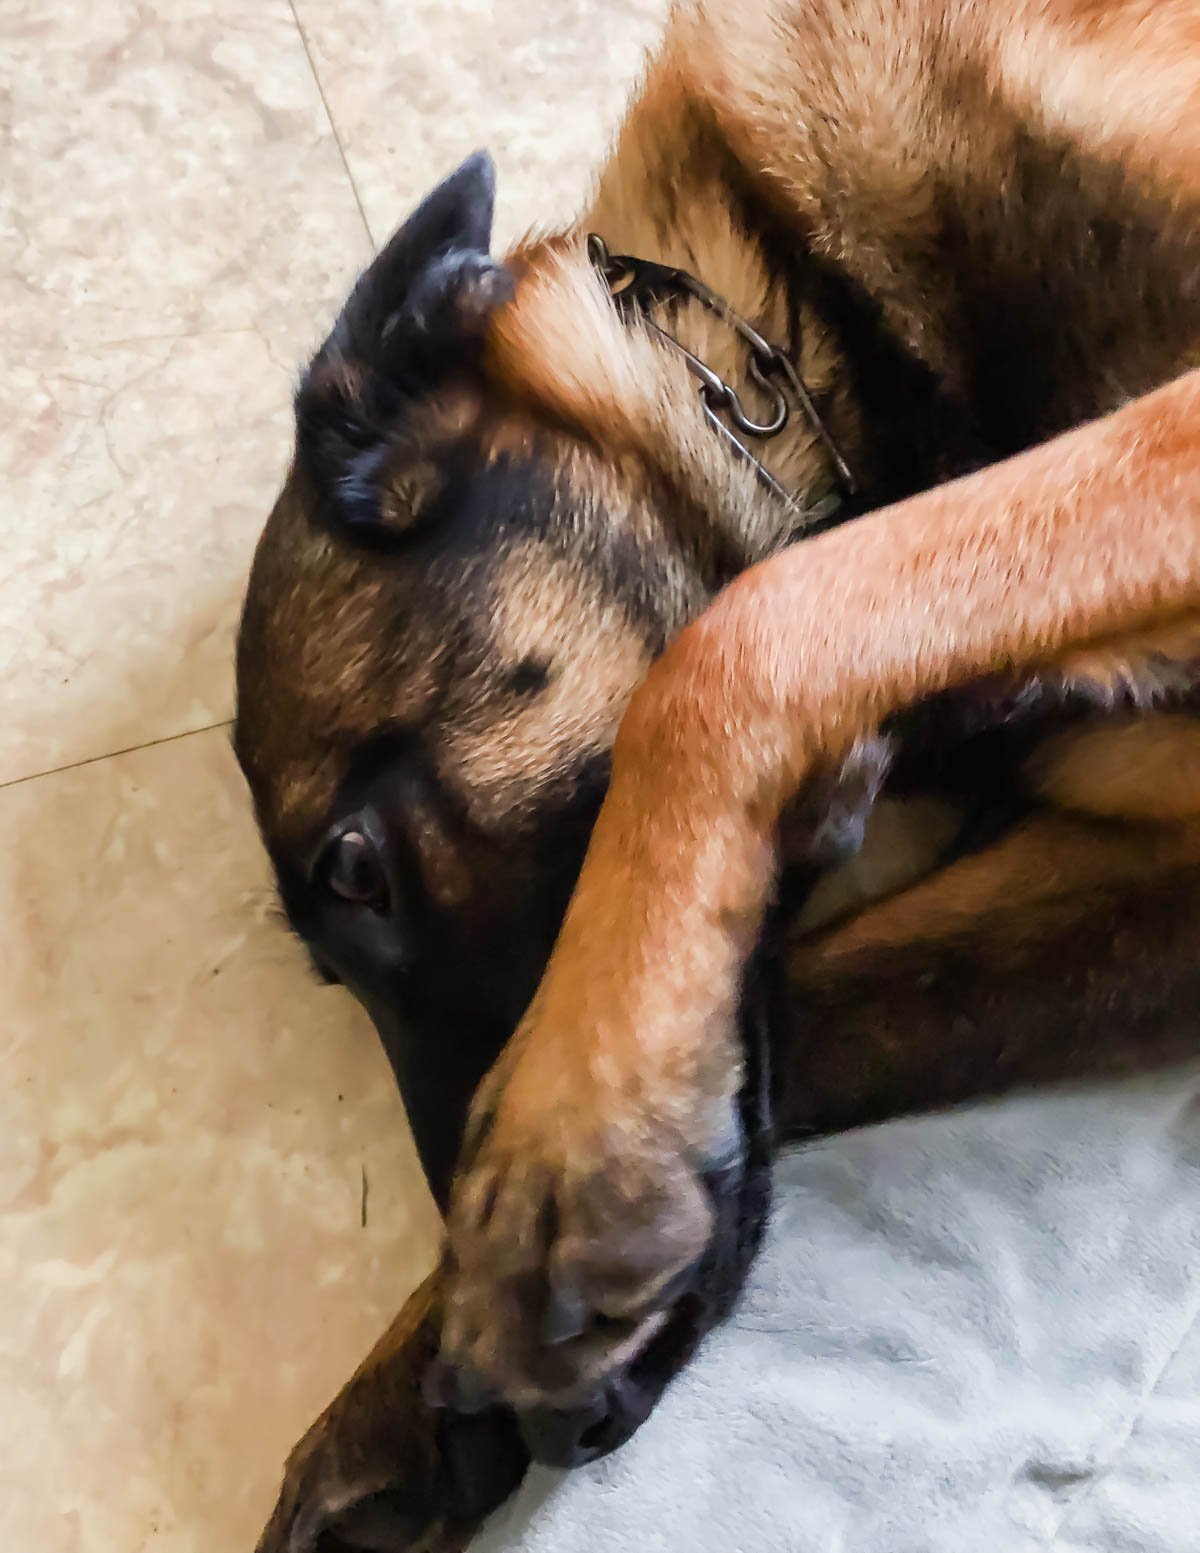 Belgian malinois laying on floor covering nose with paw.